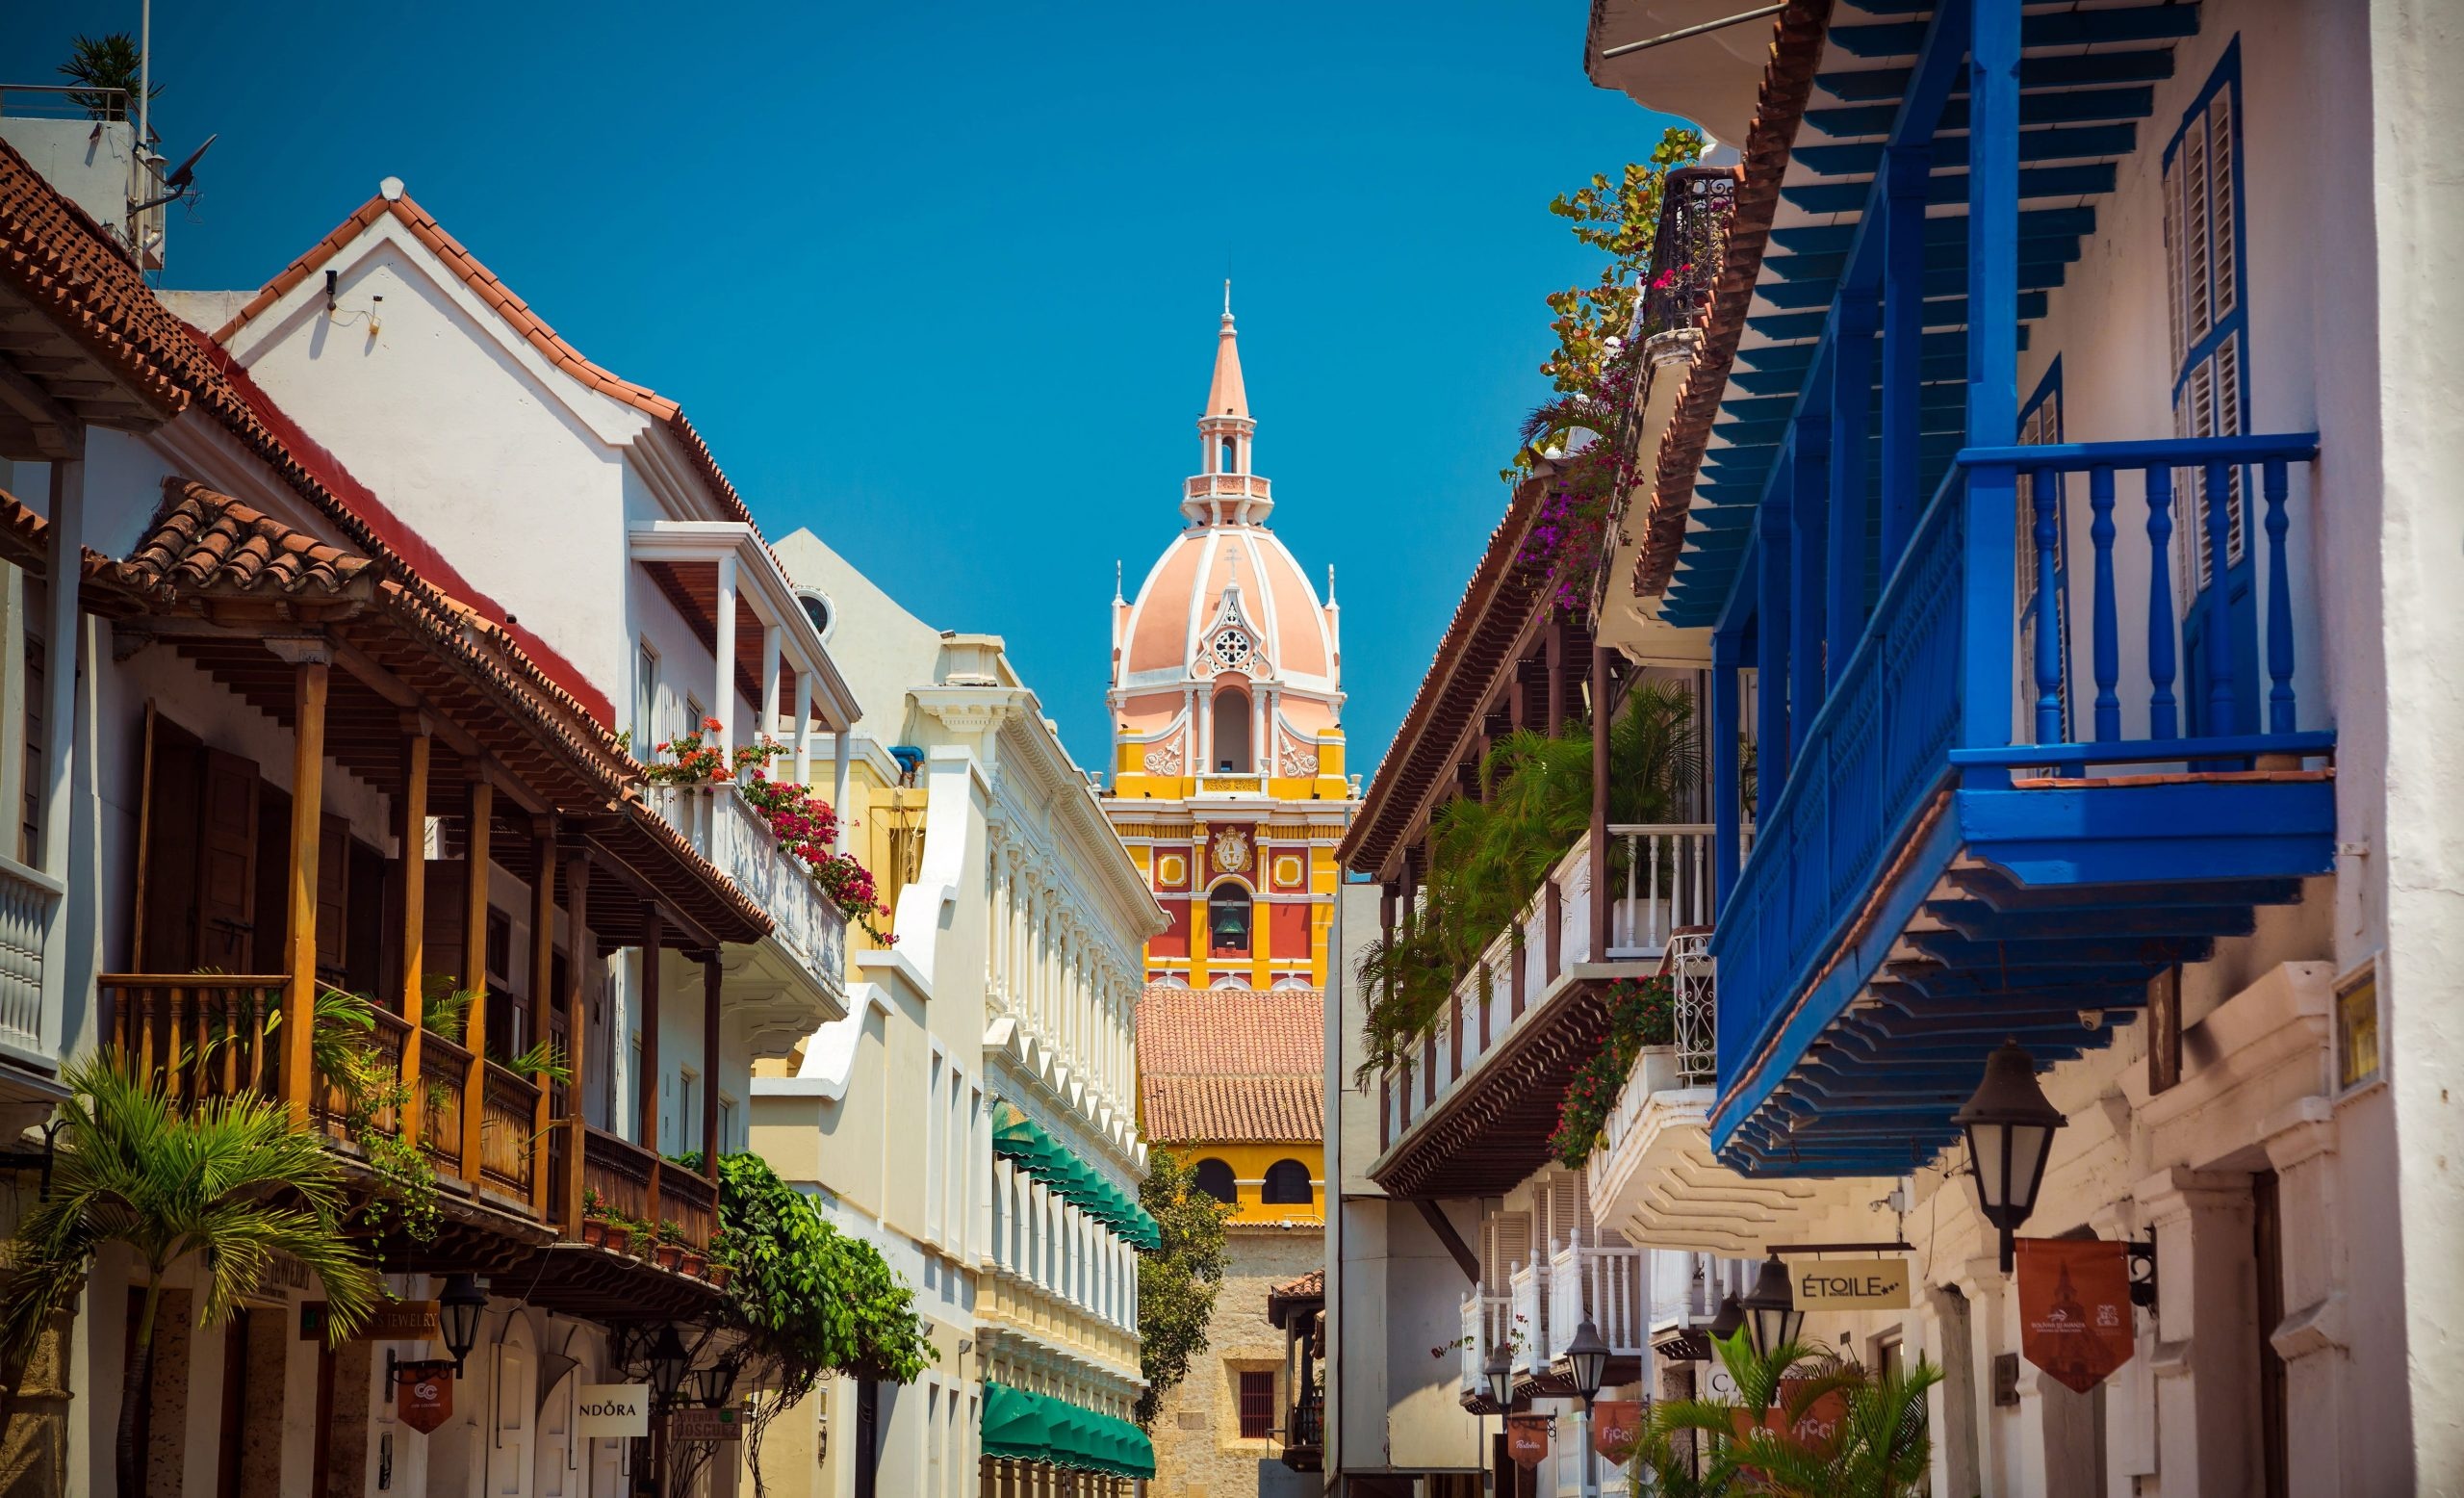 Colombia: Cartagena, The first Spanish colony in the Americas, Caribbean, Architecture. 2560x1560 HD Wallpaper.